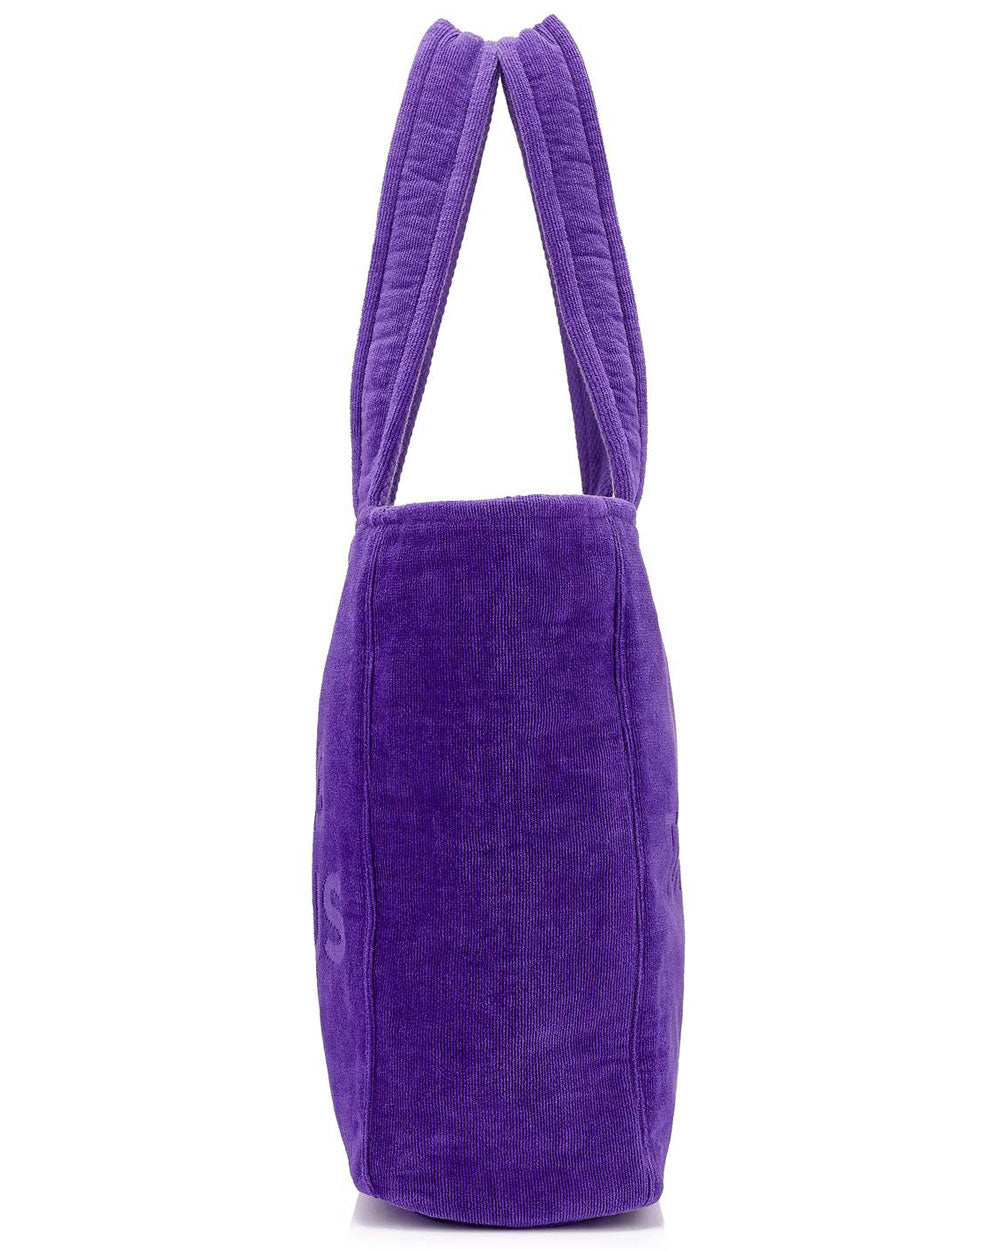 African Violet Beach Tote